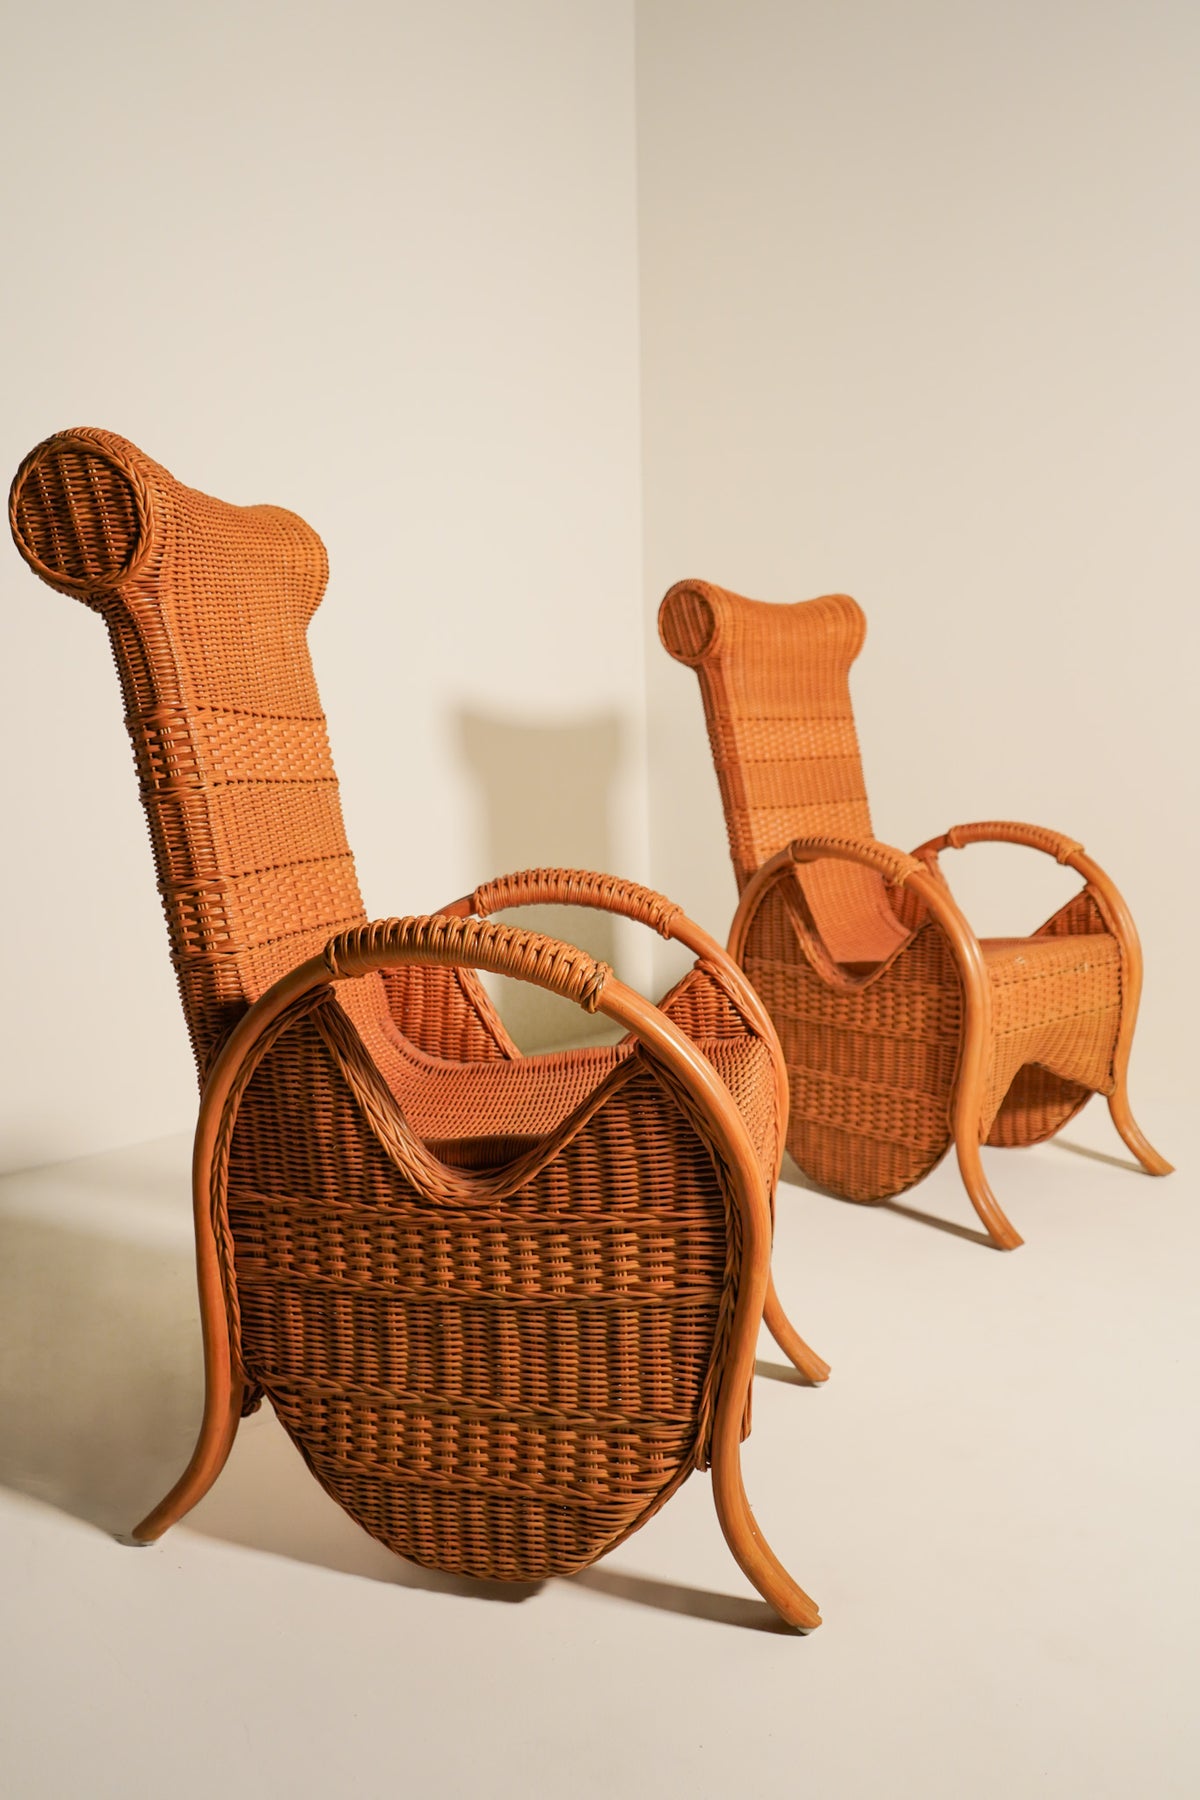 Sculpted Wicker & Rattan Chairs